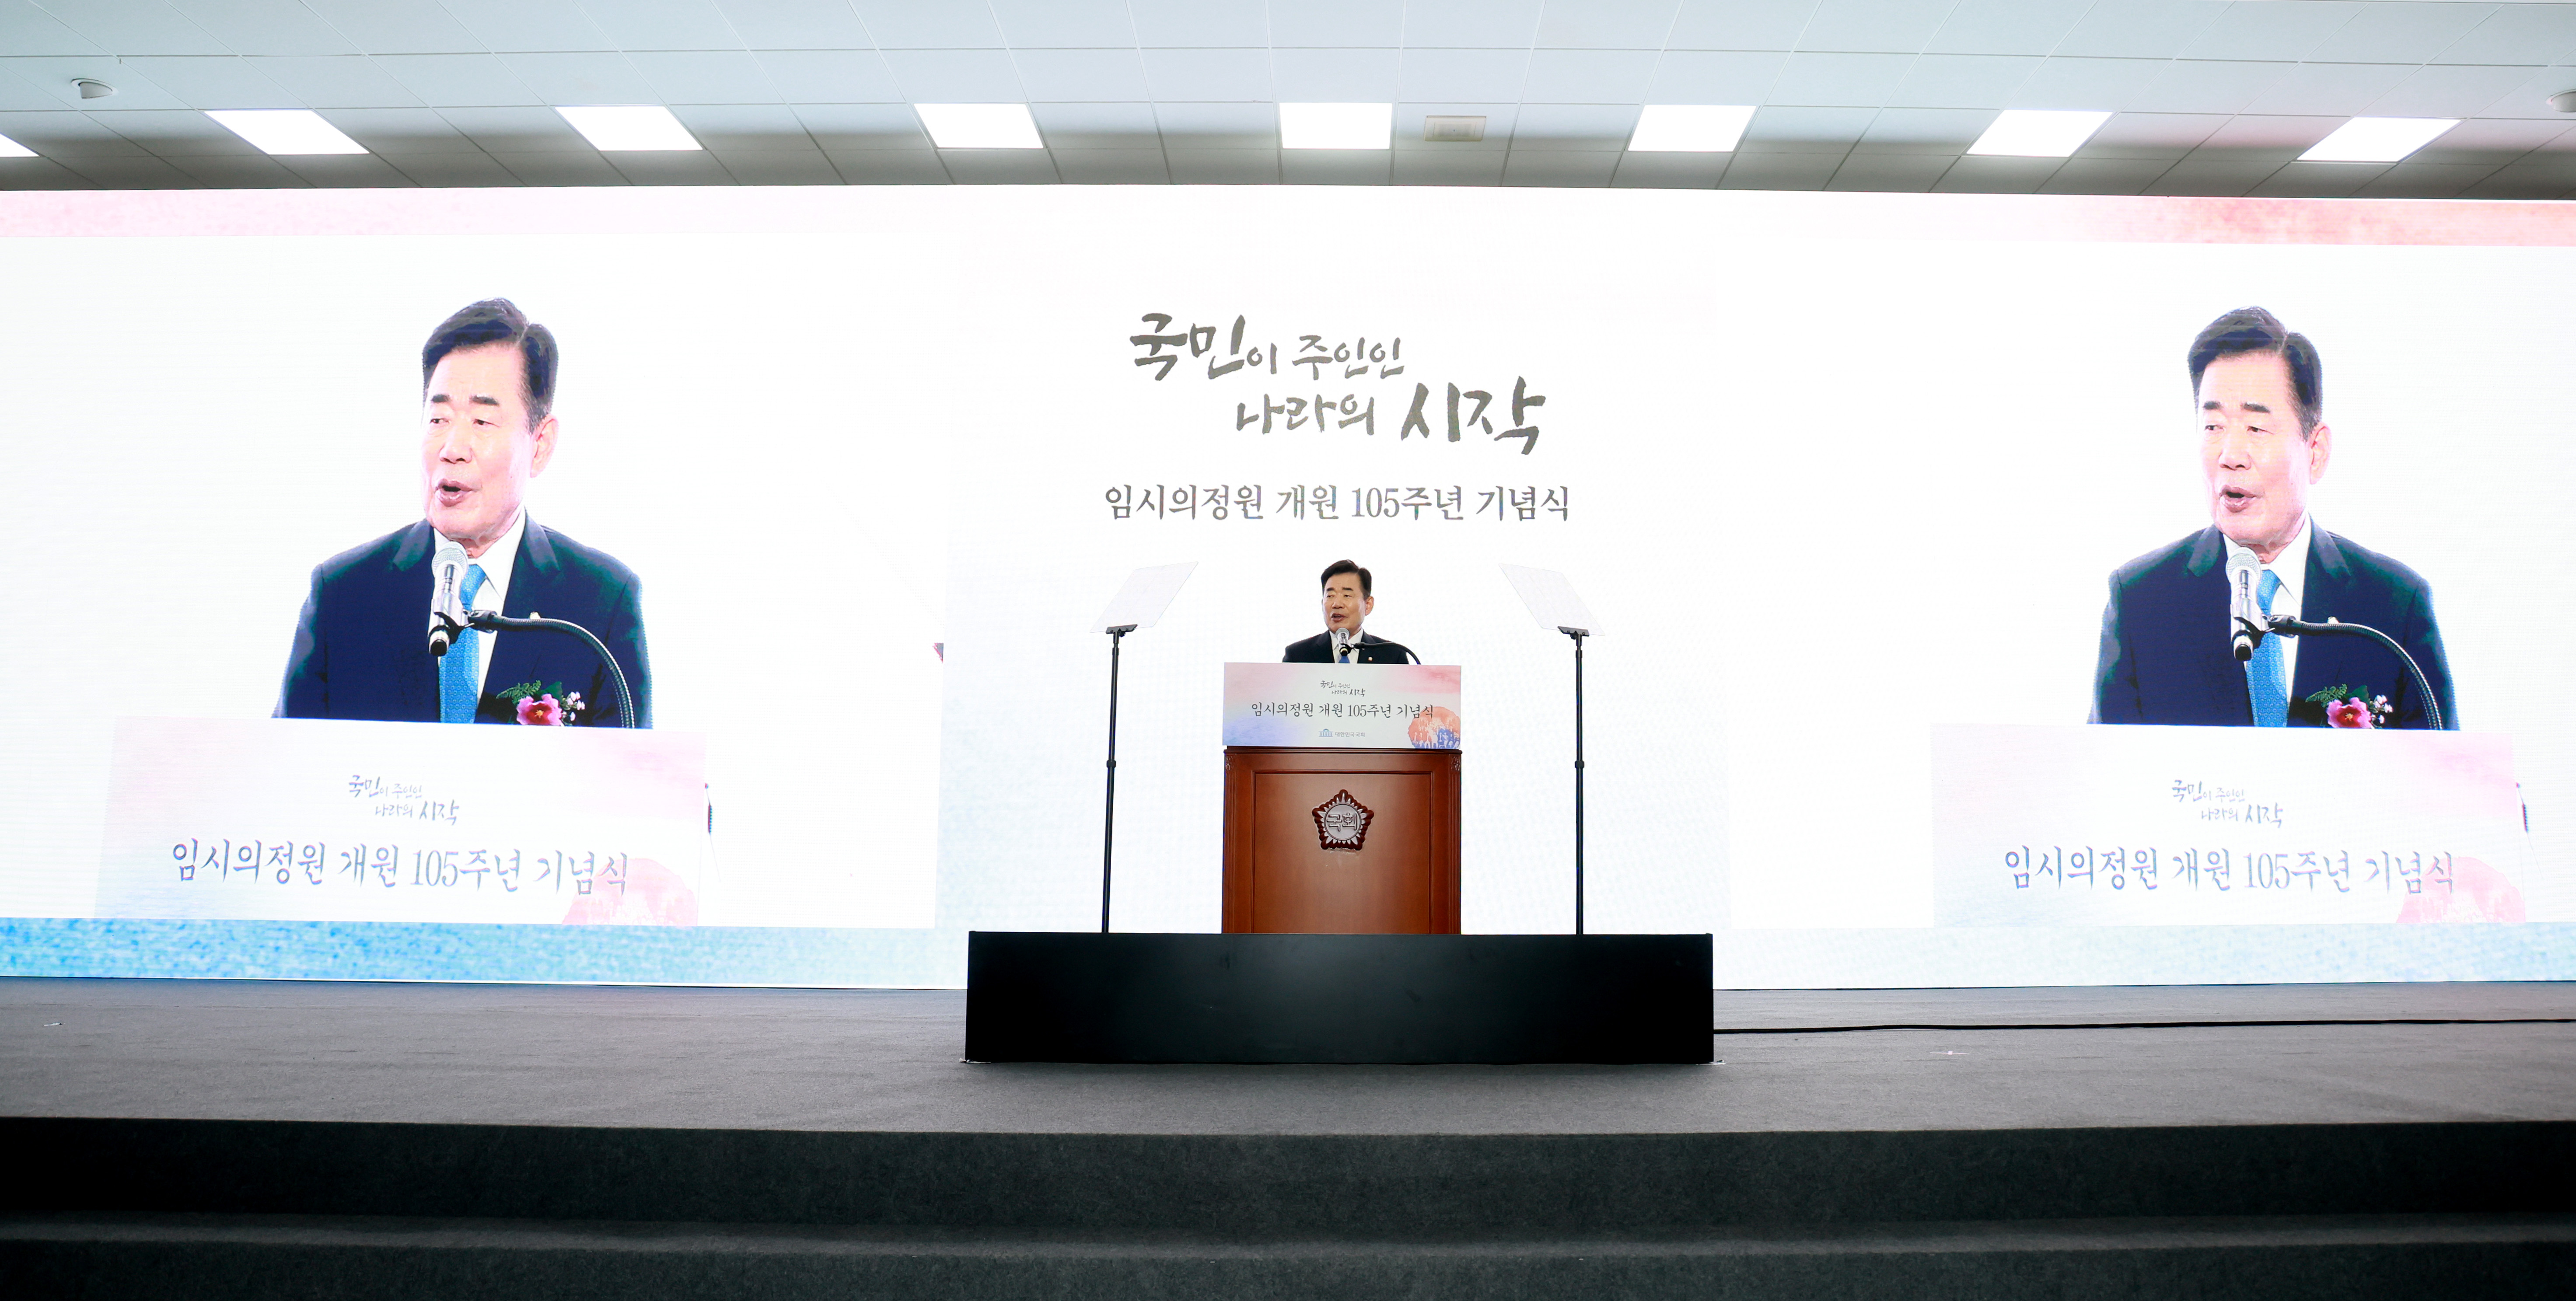 Speaker urges &ldquo;national unity&rdquo; at 105th anniv. of the Provisional Legislative Assembly opening 관련사진 5 보기